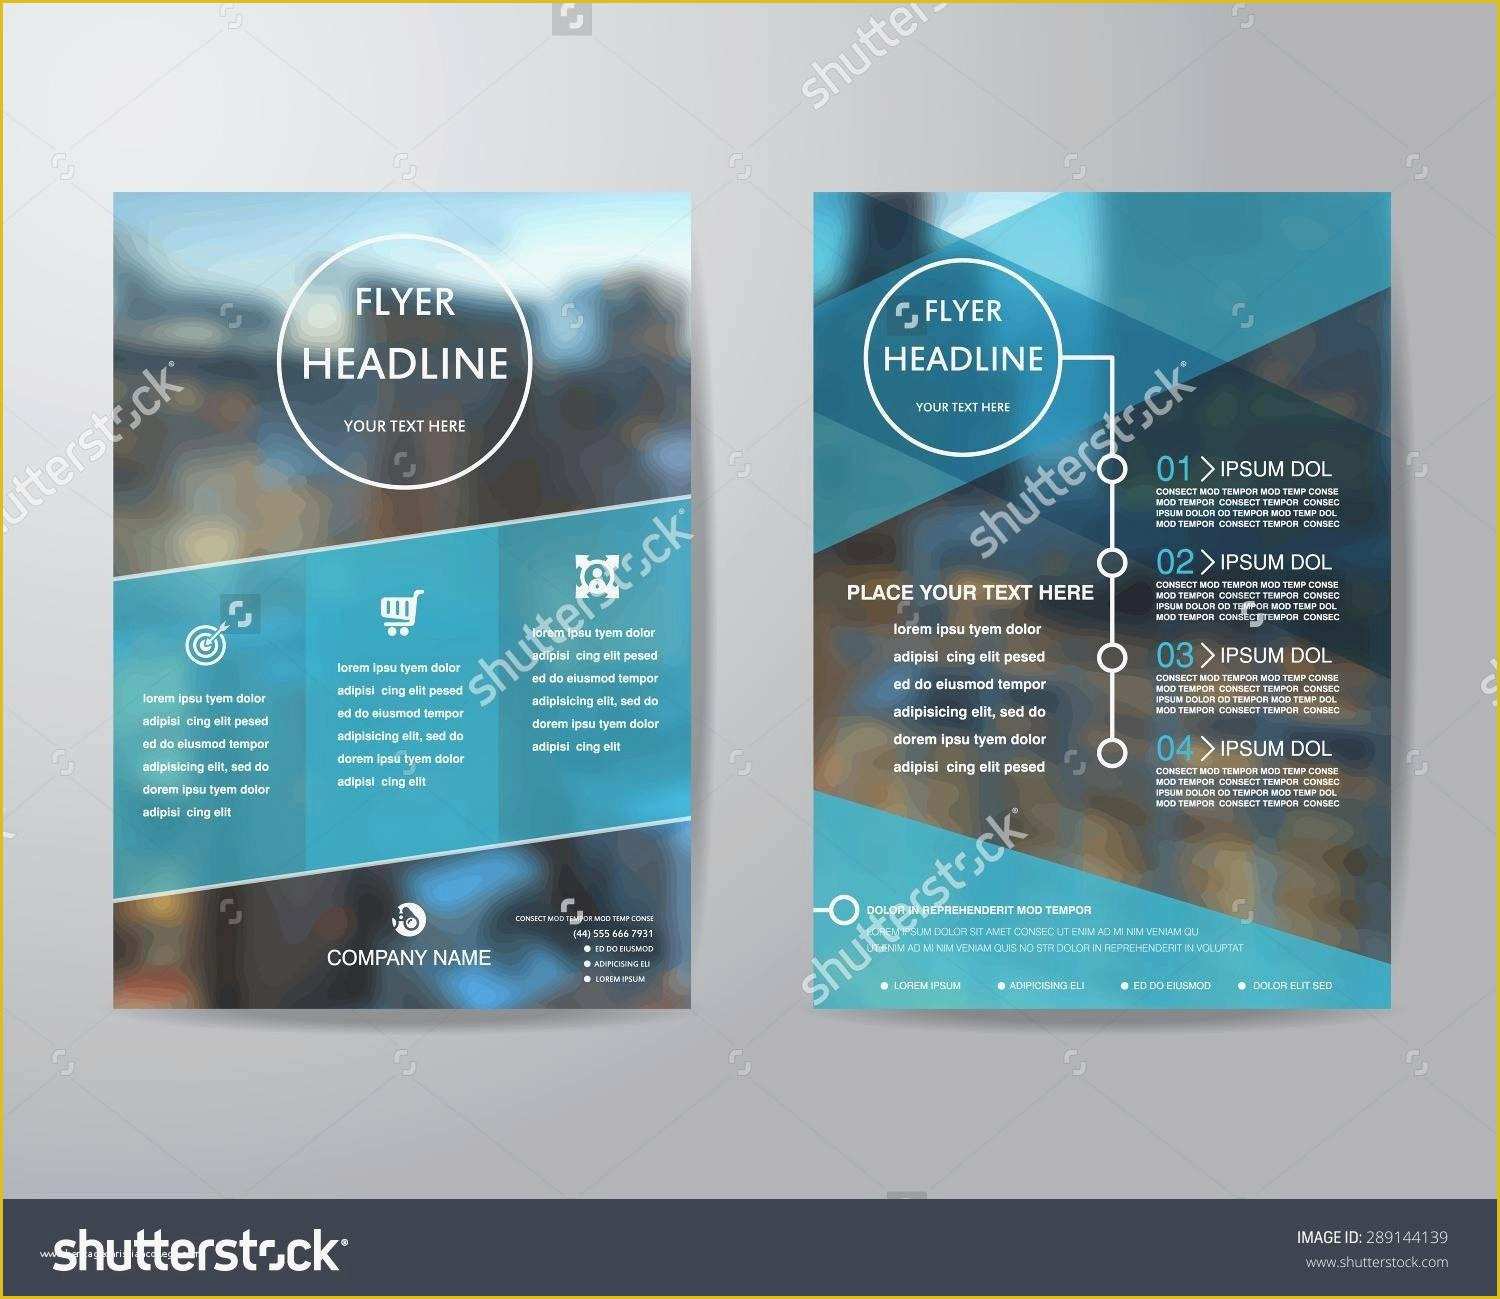 Powerpoint Flyer Templates Free Of Ppt Brochure Templates Free New Best Ppt Background